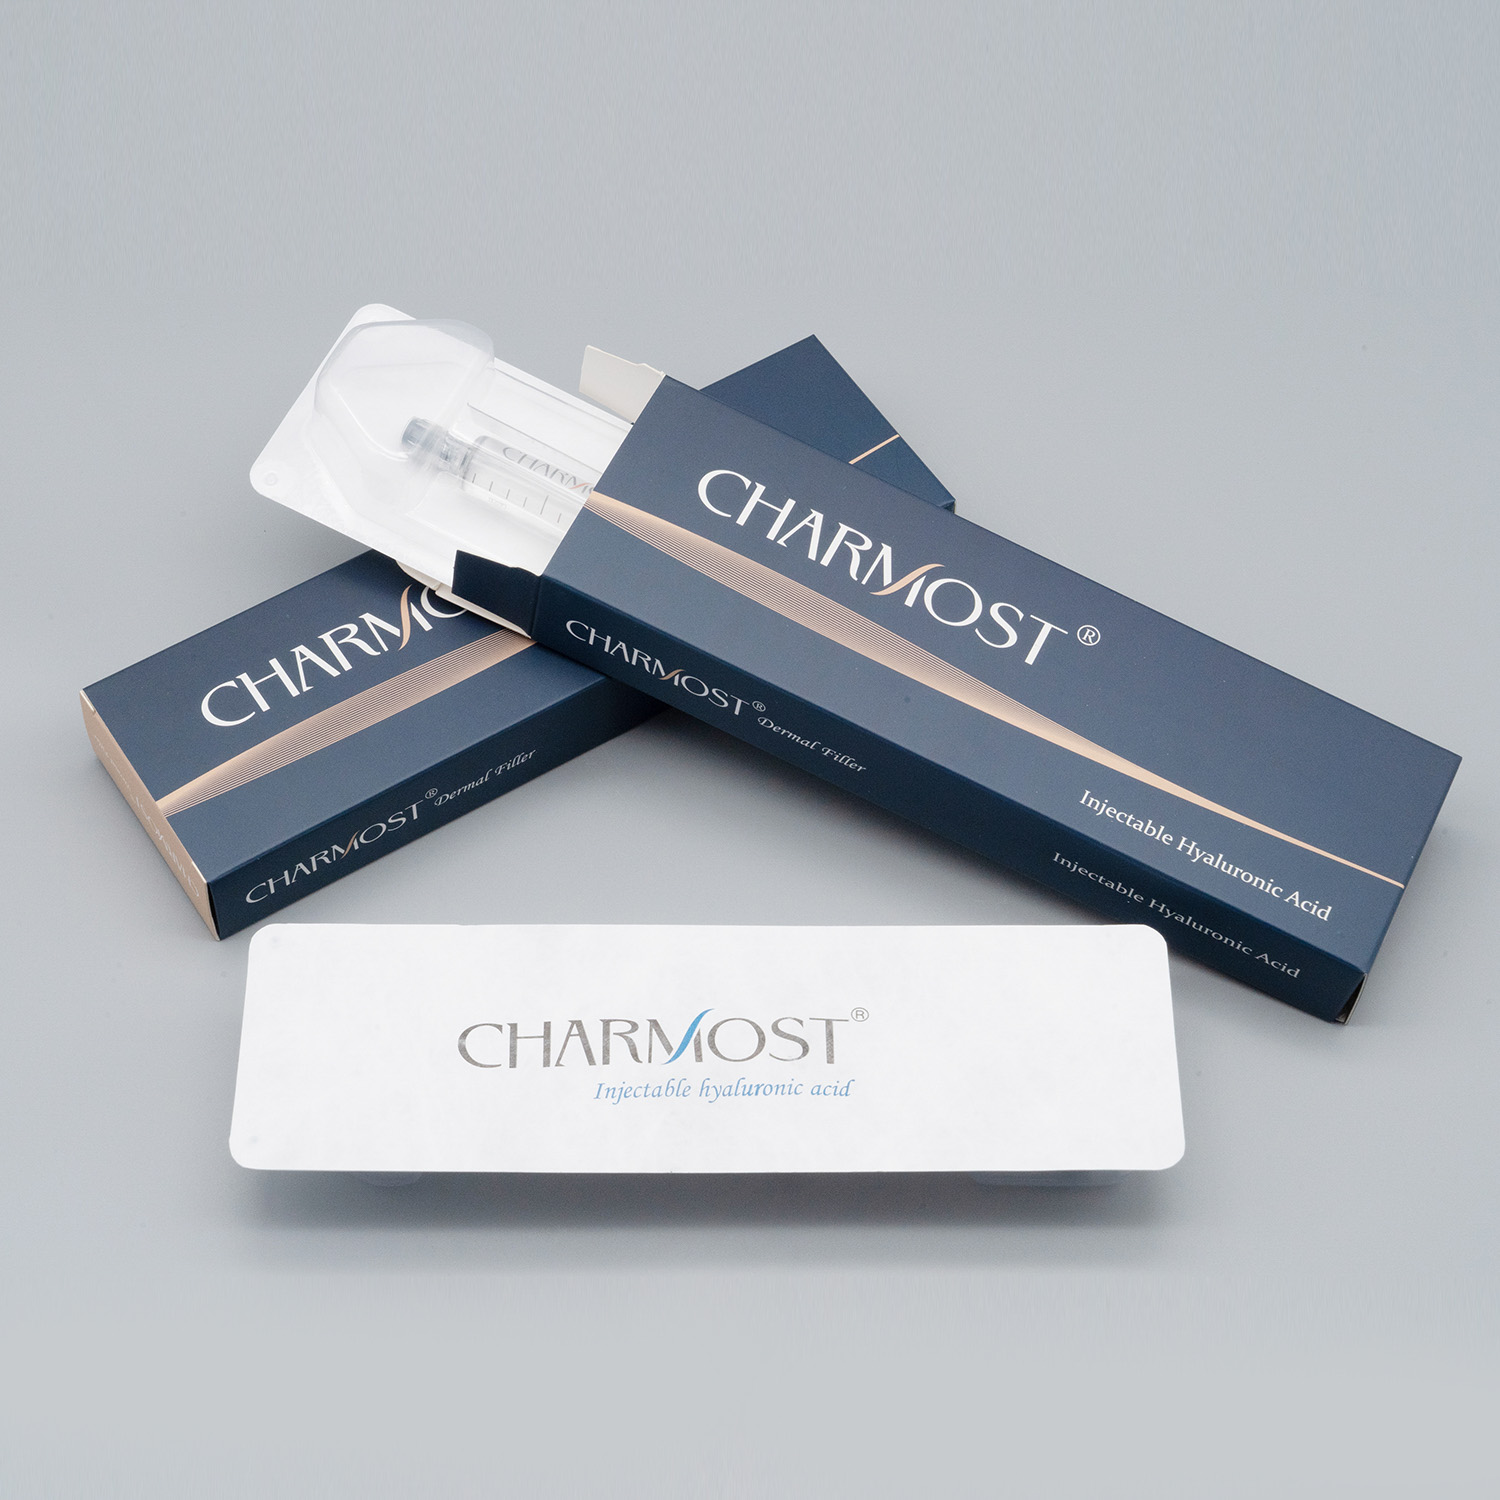 10ML 20ML Charmost ® TOP Selling Buttocks enhancement Injections Ha Filler For Breast